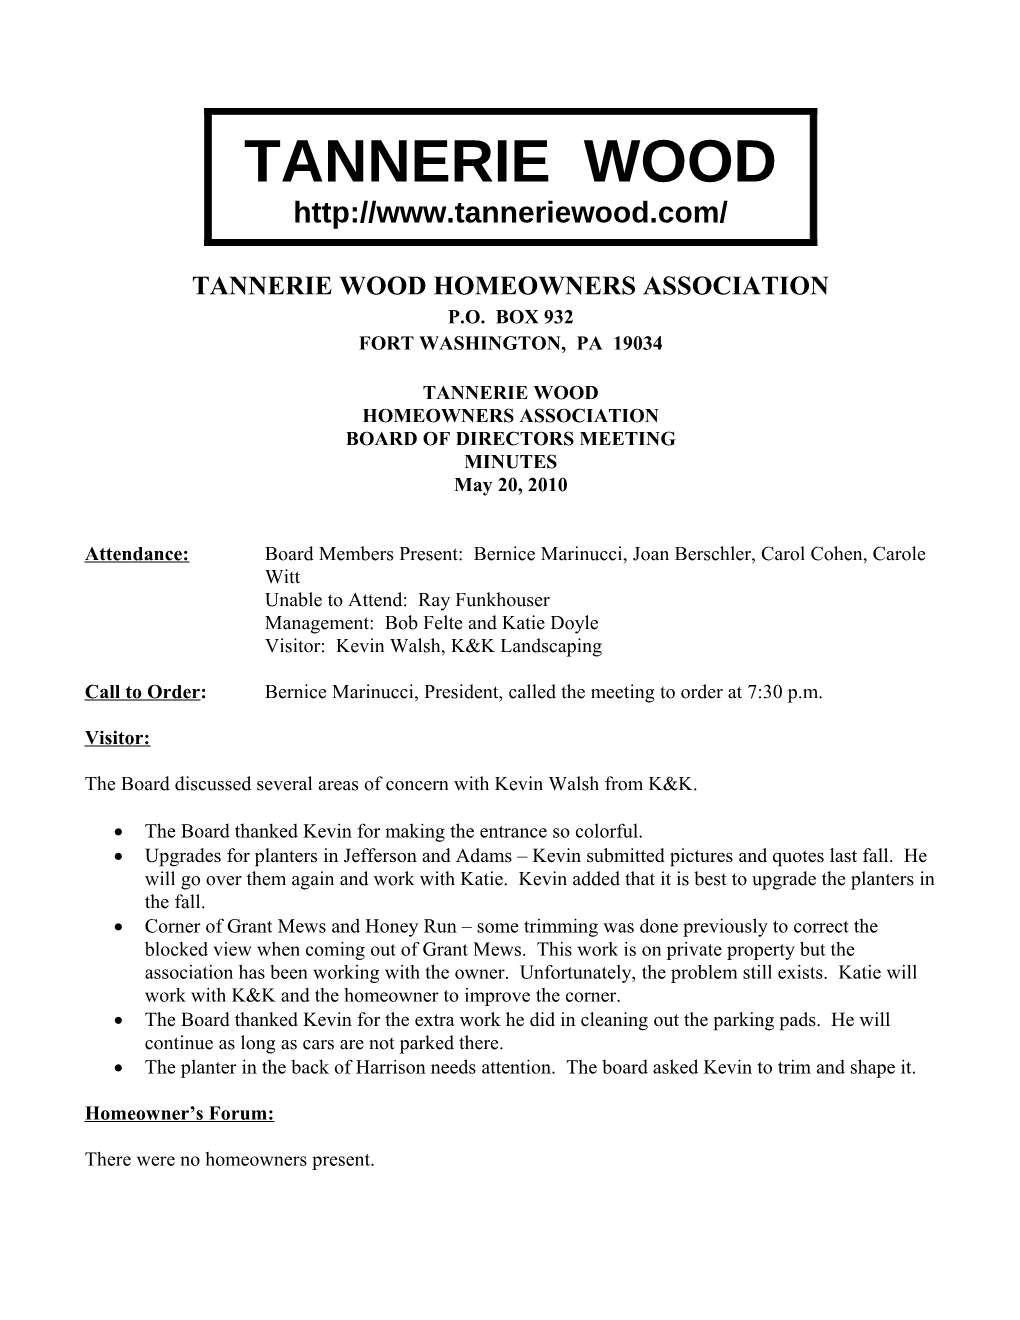 Tannerie Wood Homeowners Association